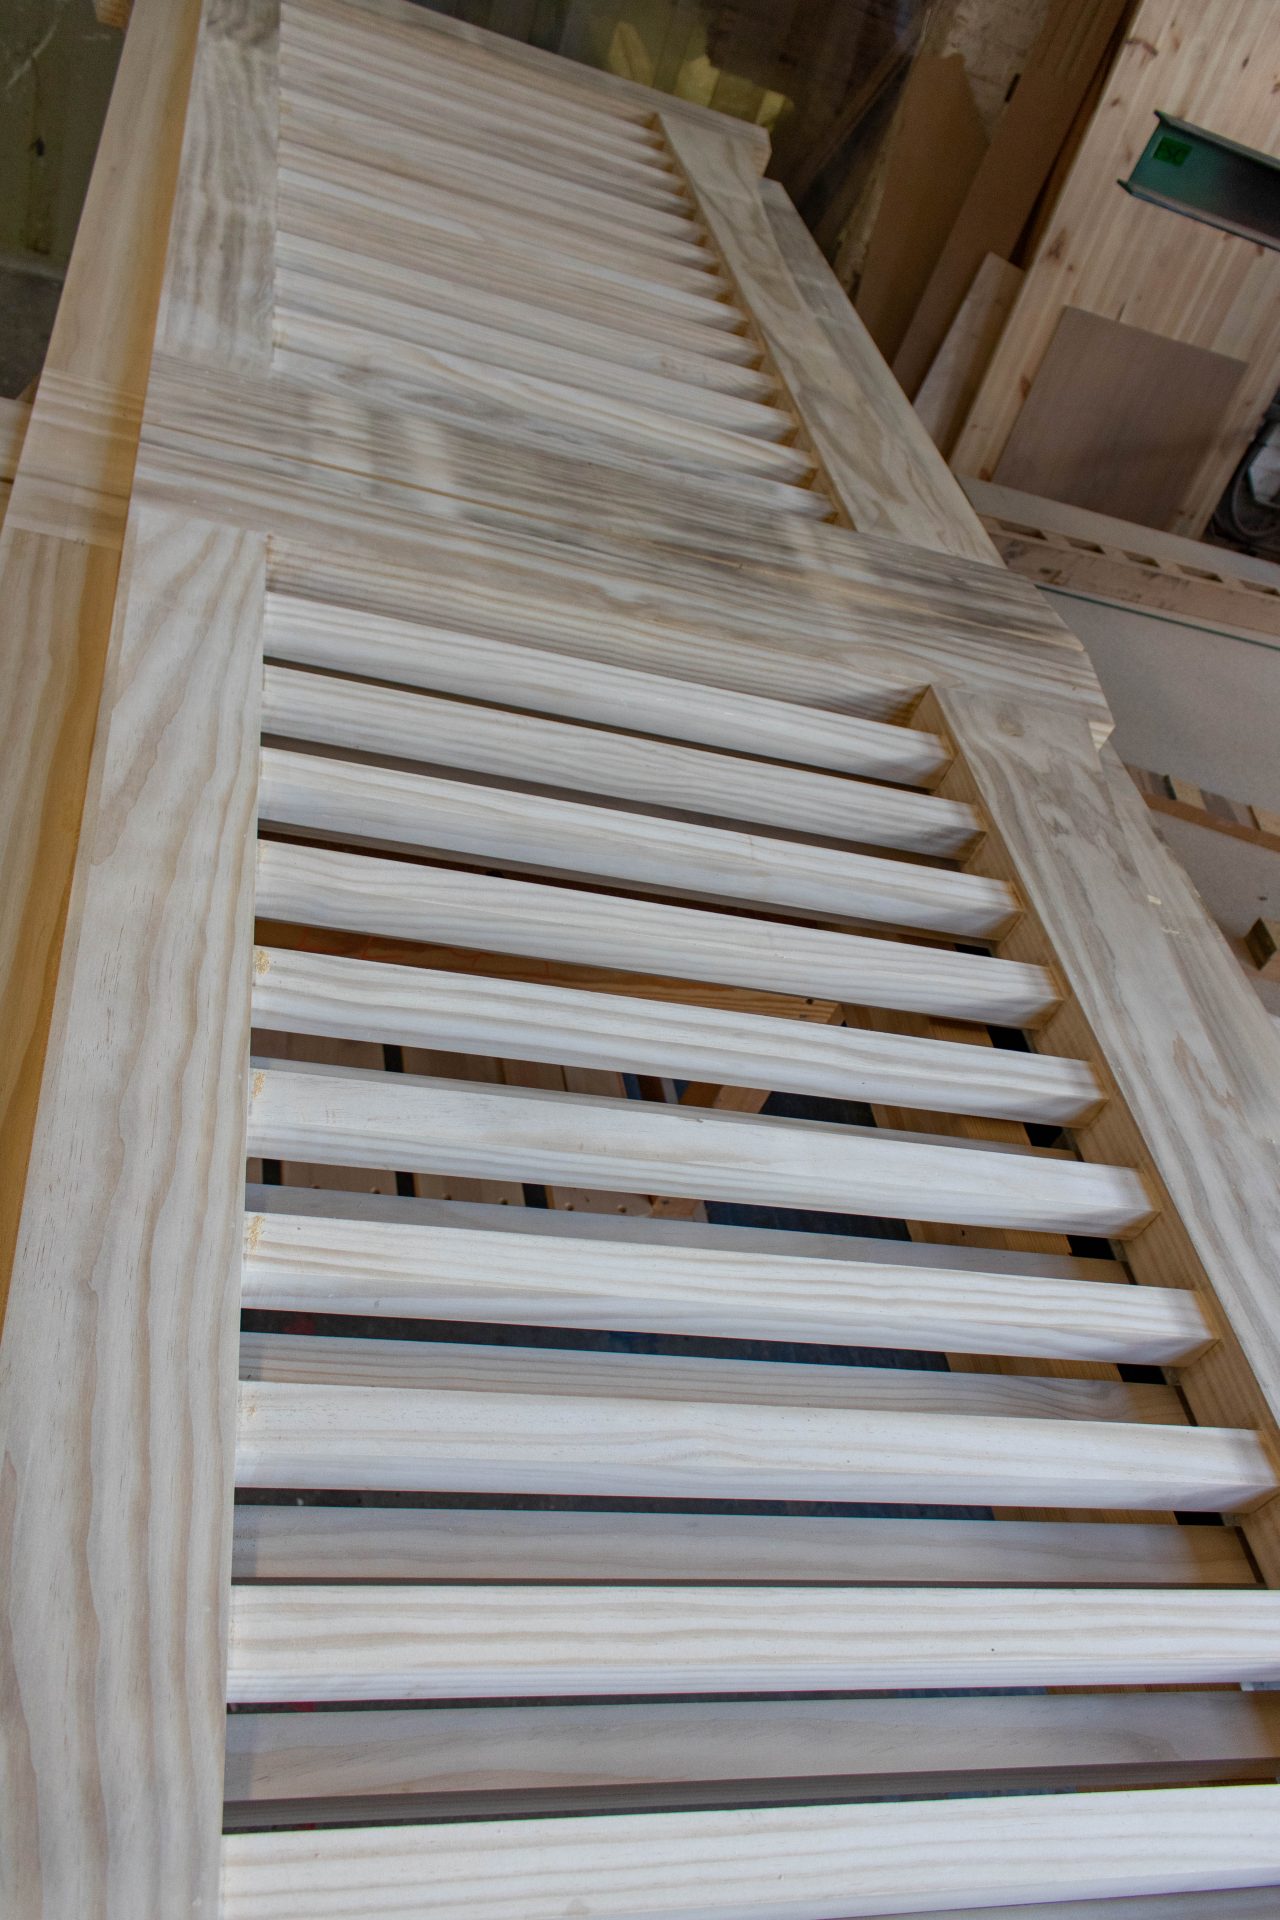 Wooden staircase manufacturer - K&D Joinery